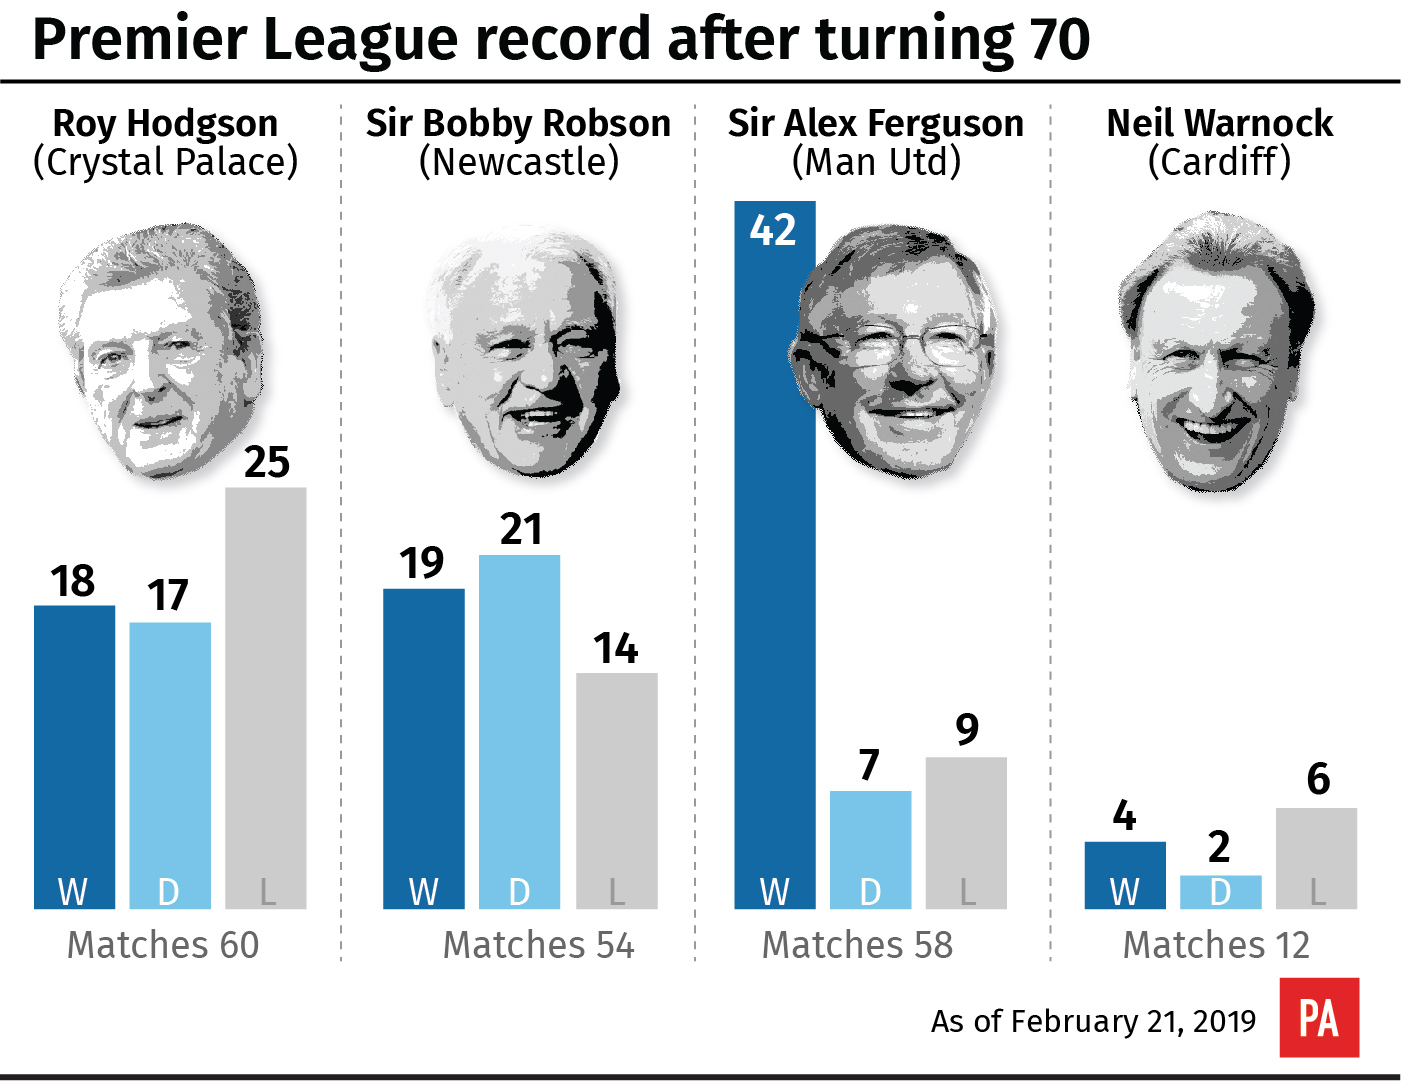 Premier League managerial record after turning 70